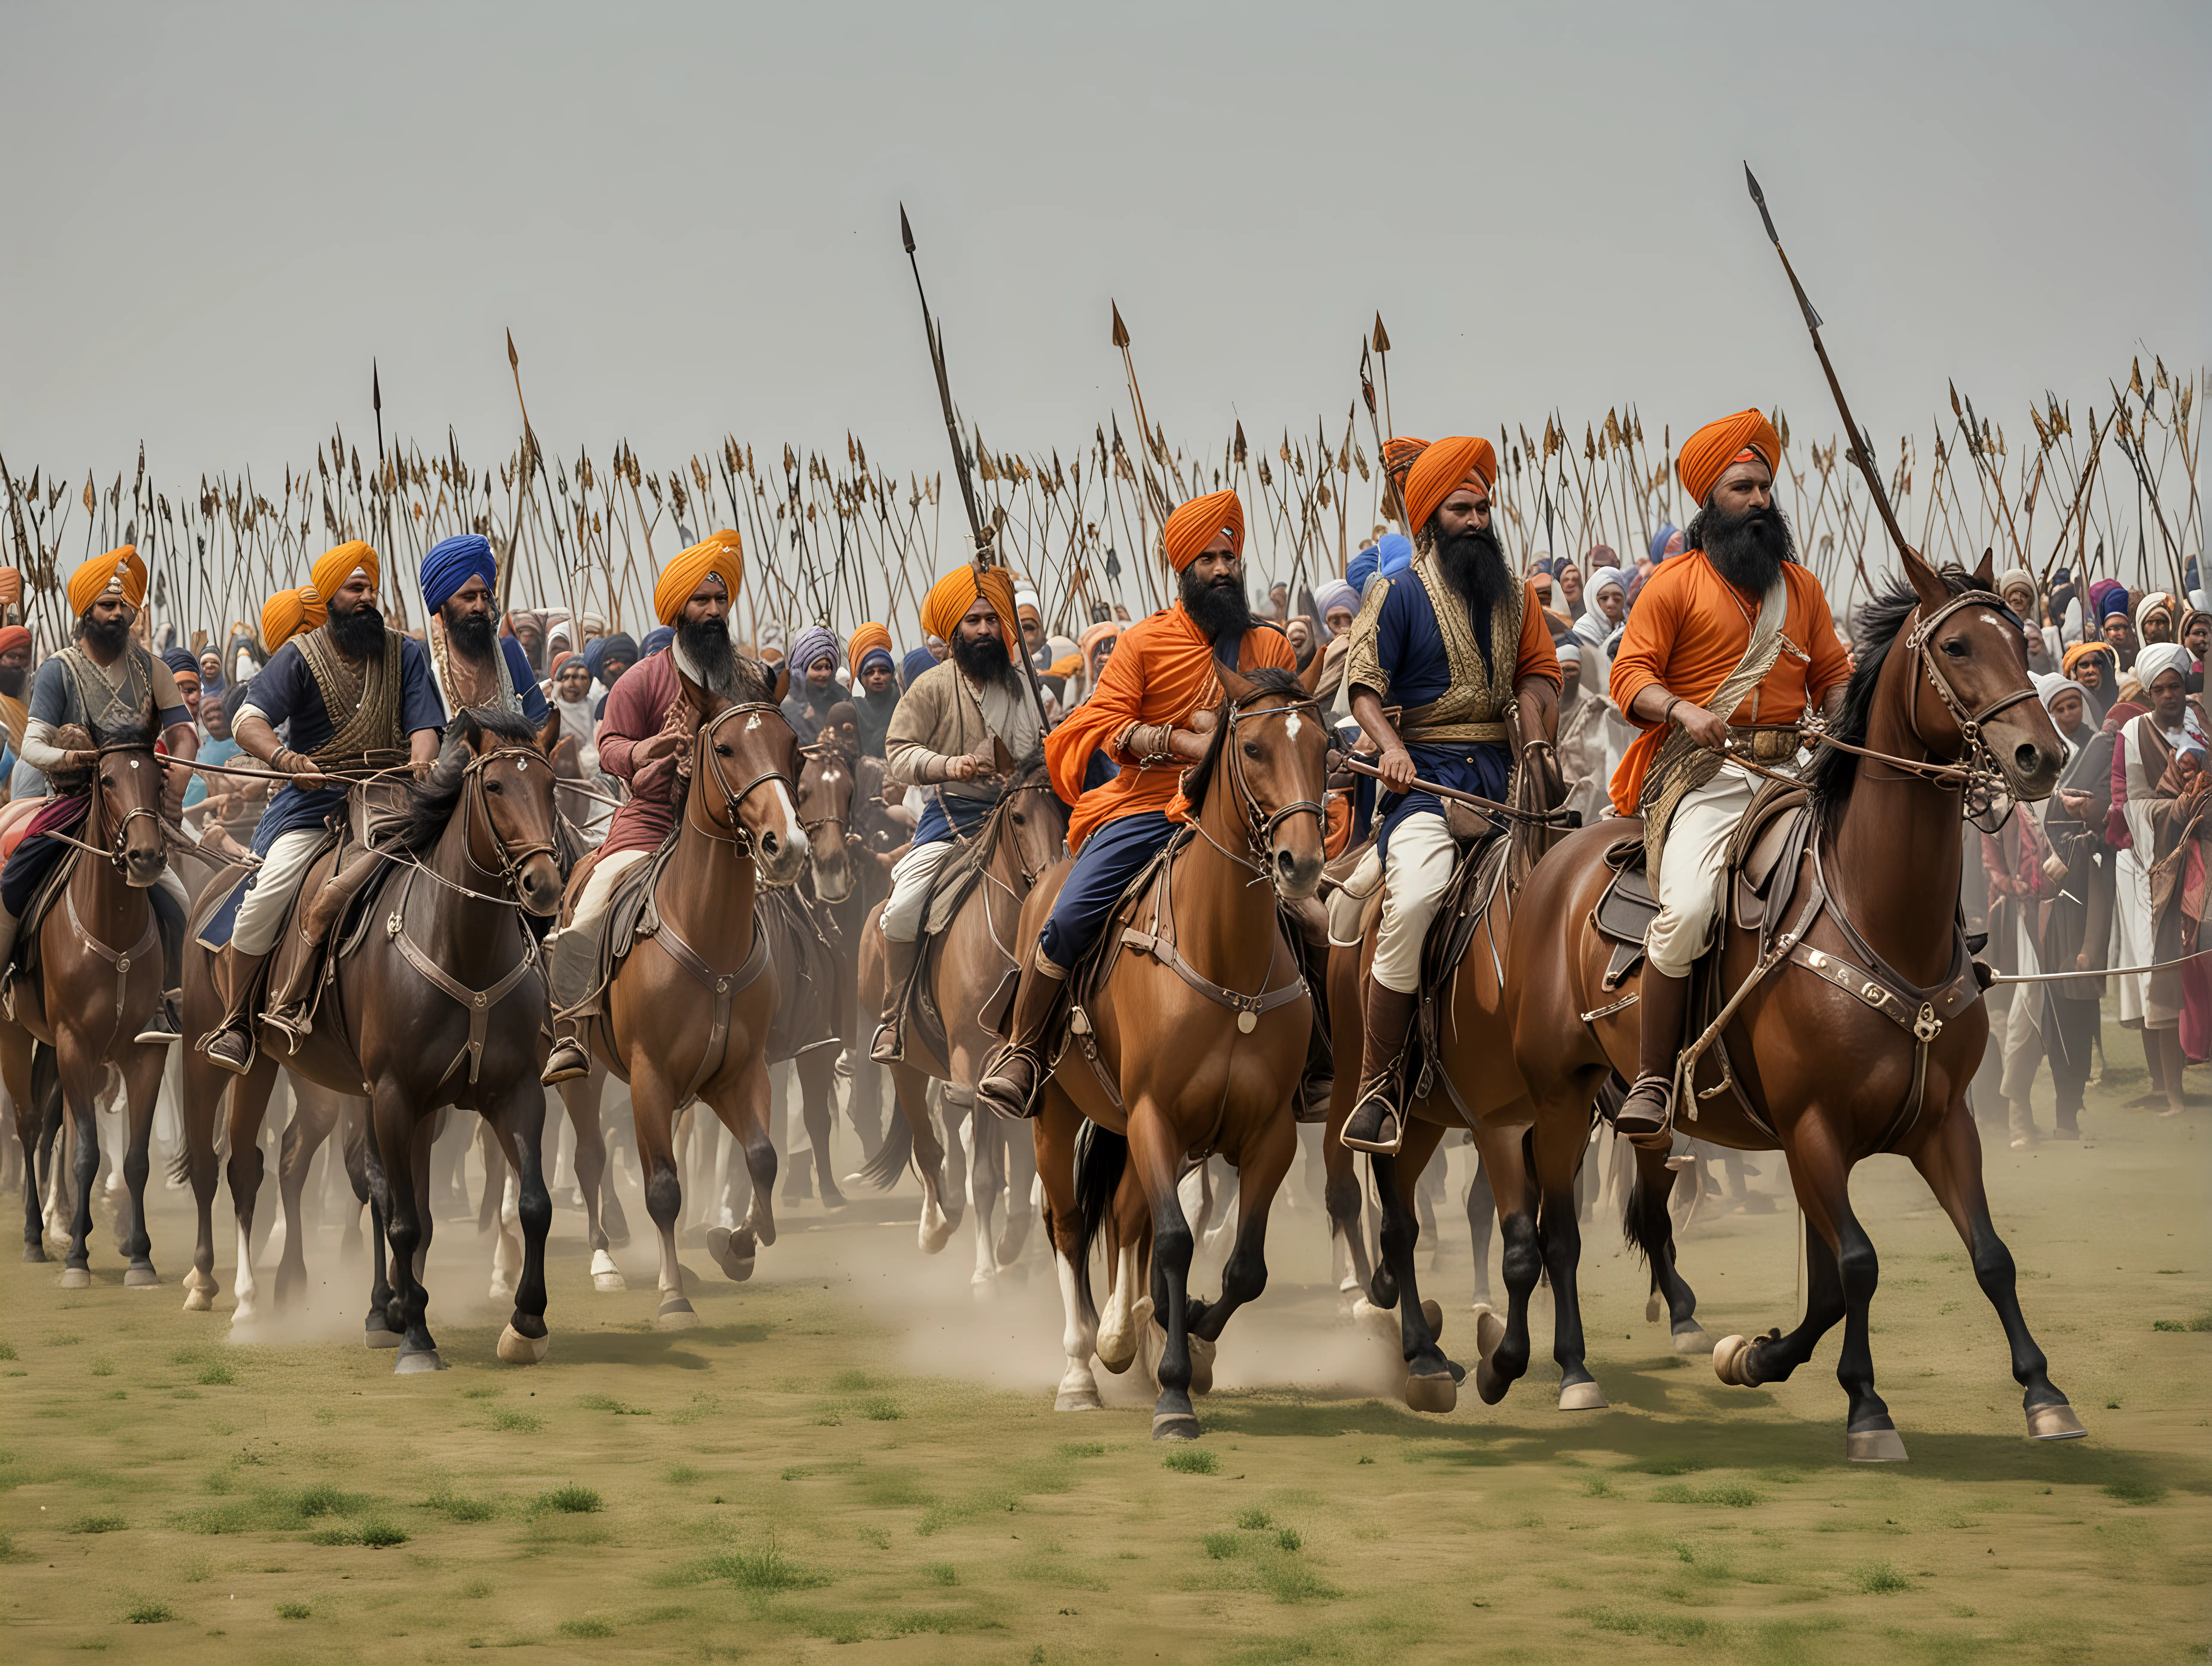 Sikh men and women on horse back, going in to battle with arrows and swords. 